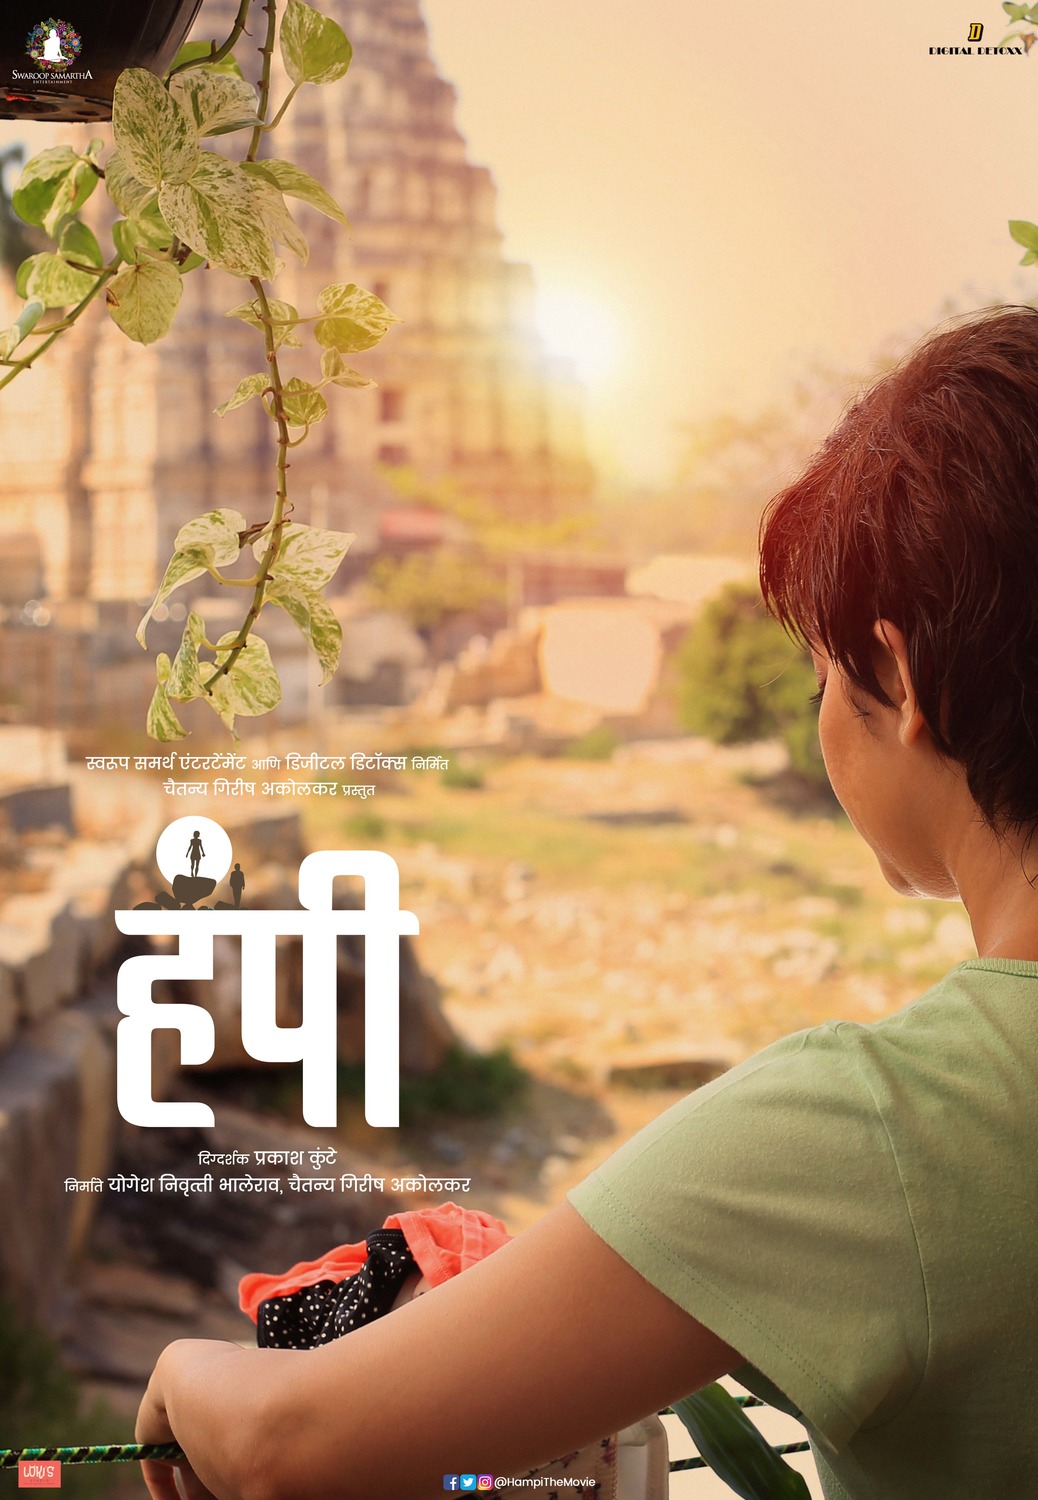 Extra Large Movie Poster Image for Hampi (#12 of 17)